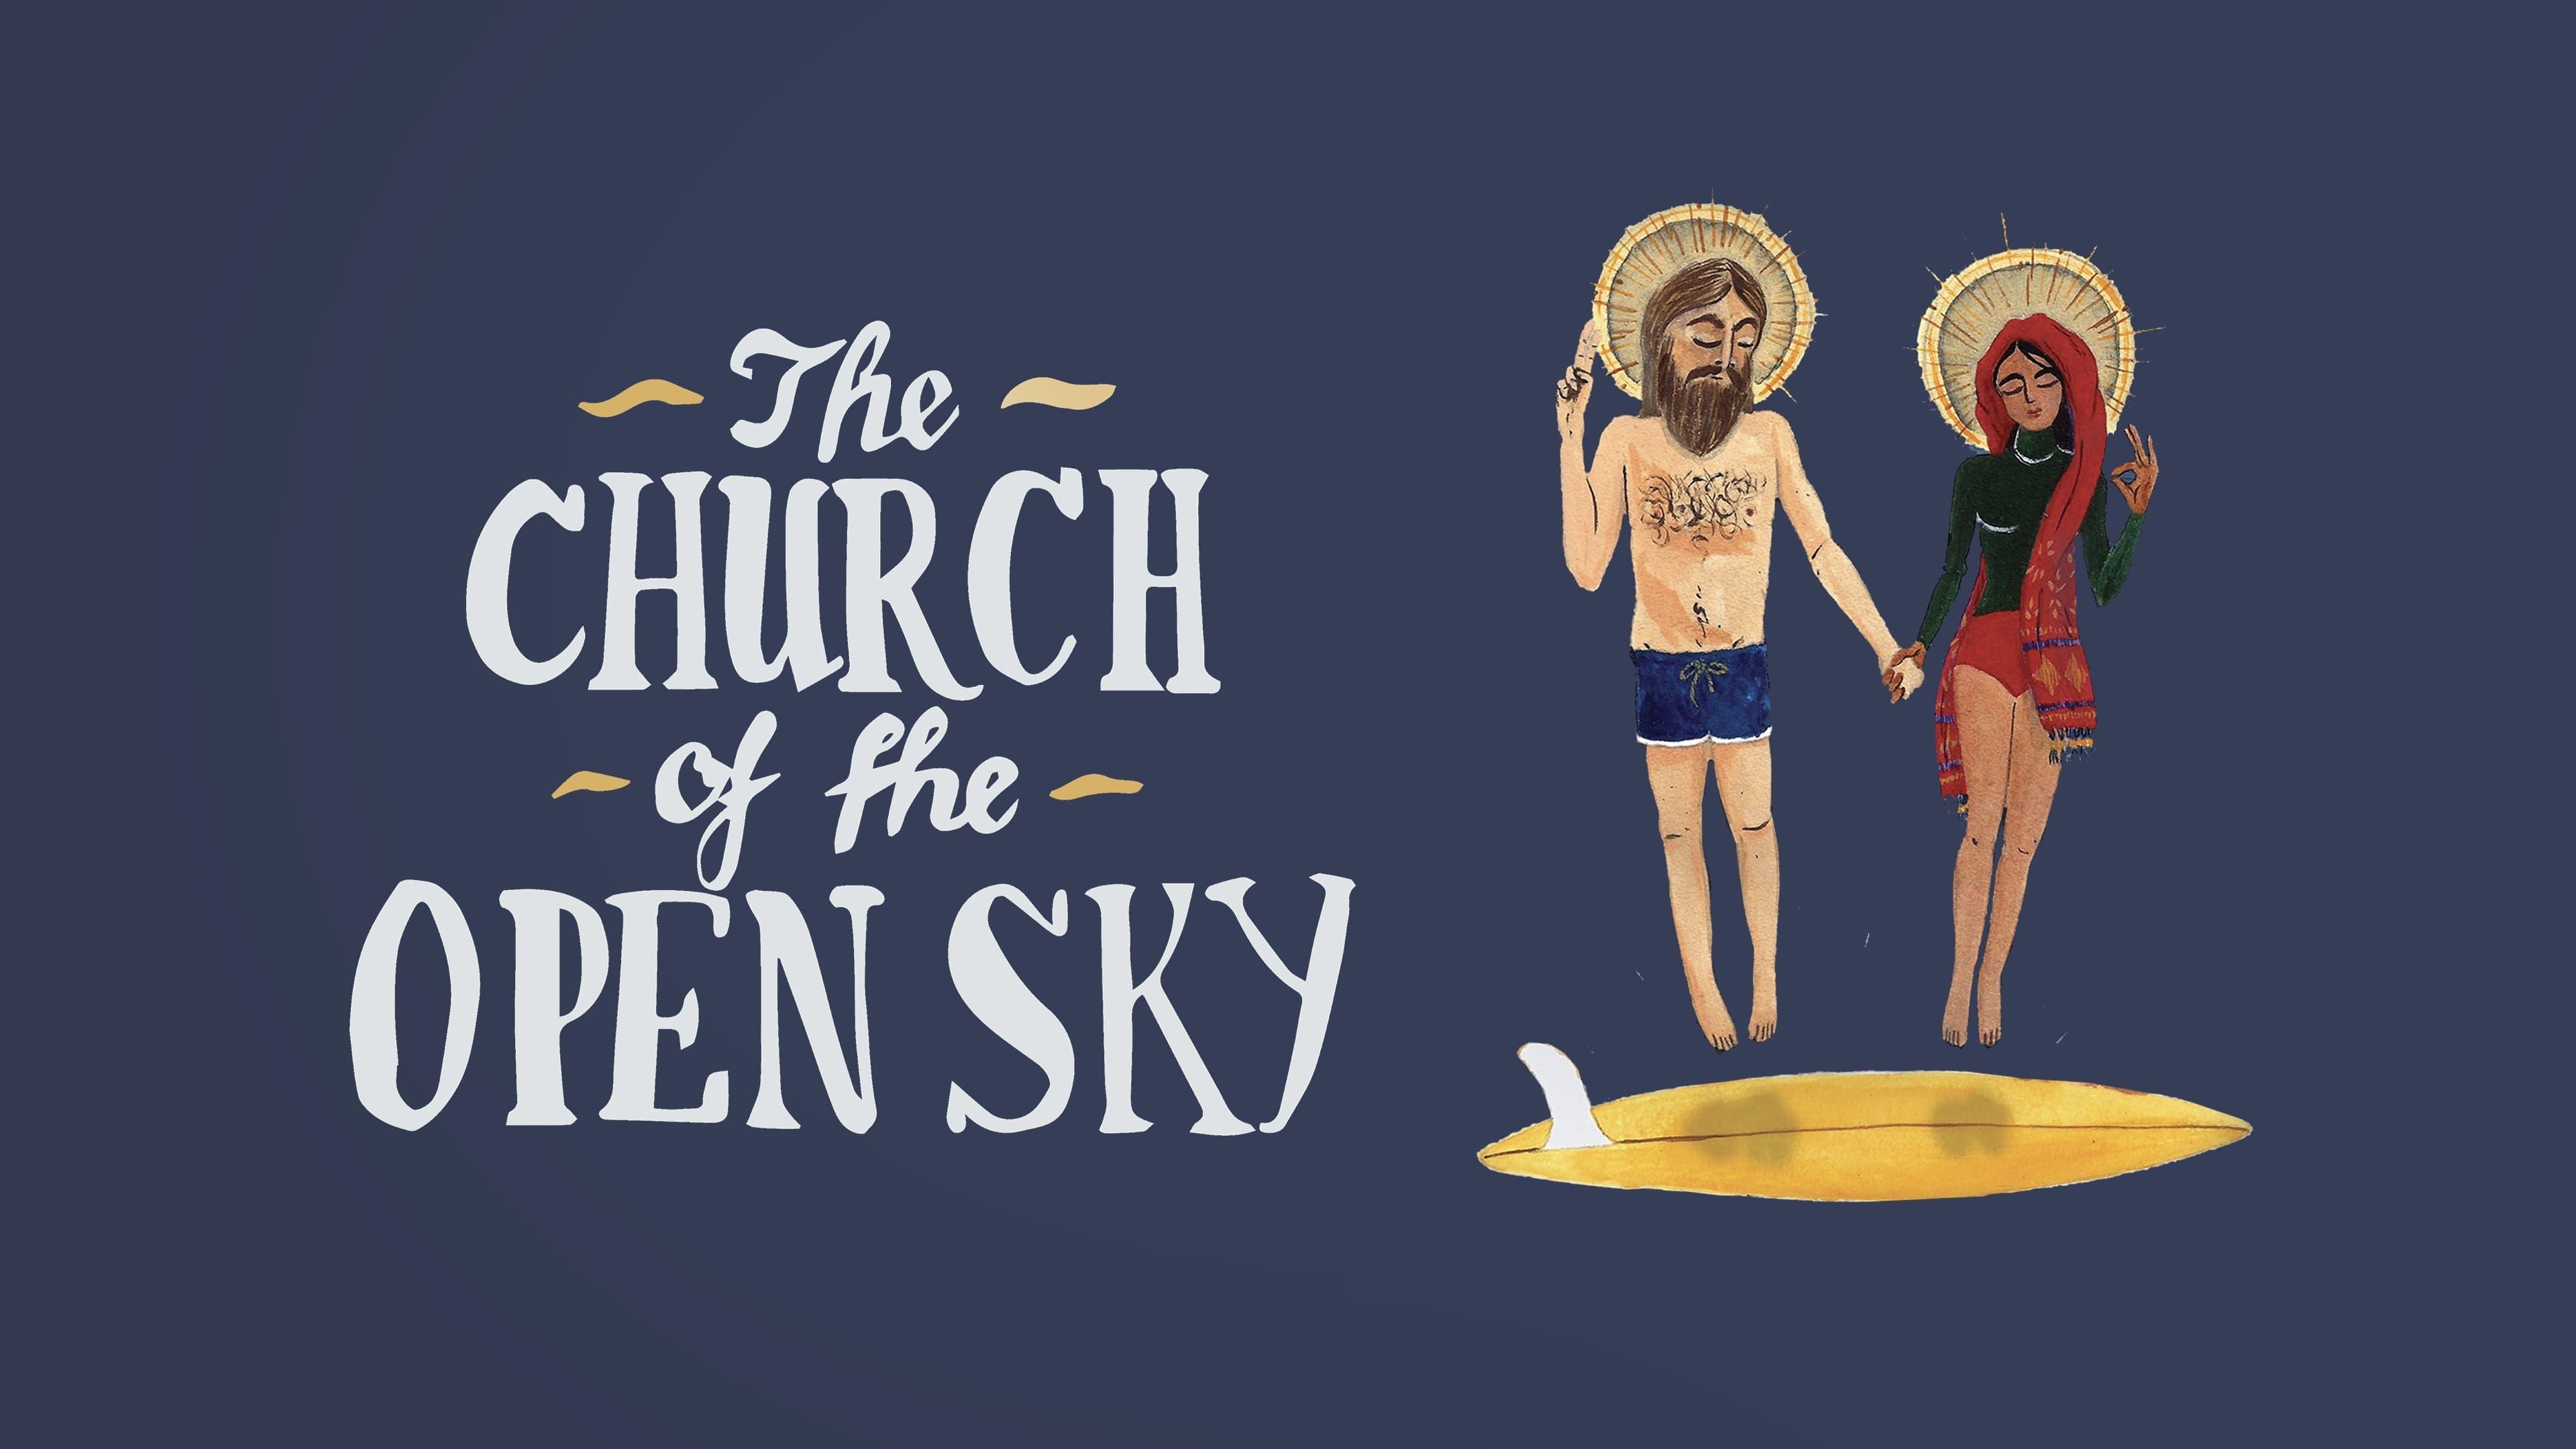 The Church of the Open Sky backdrop